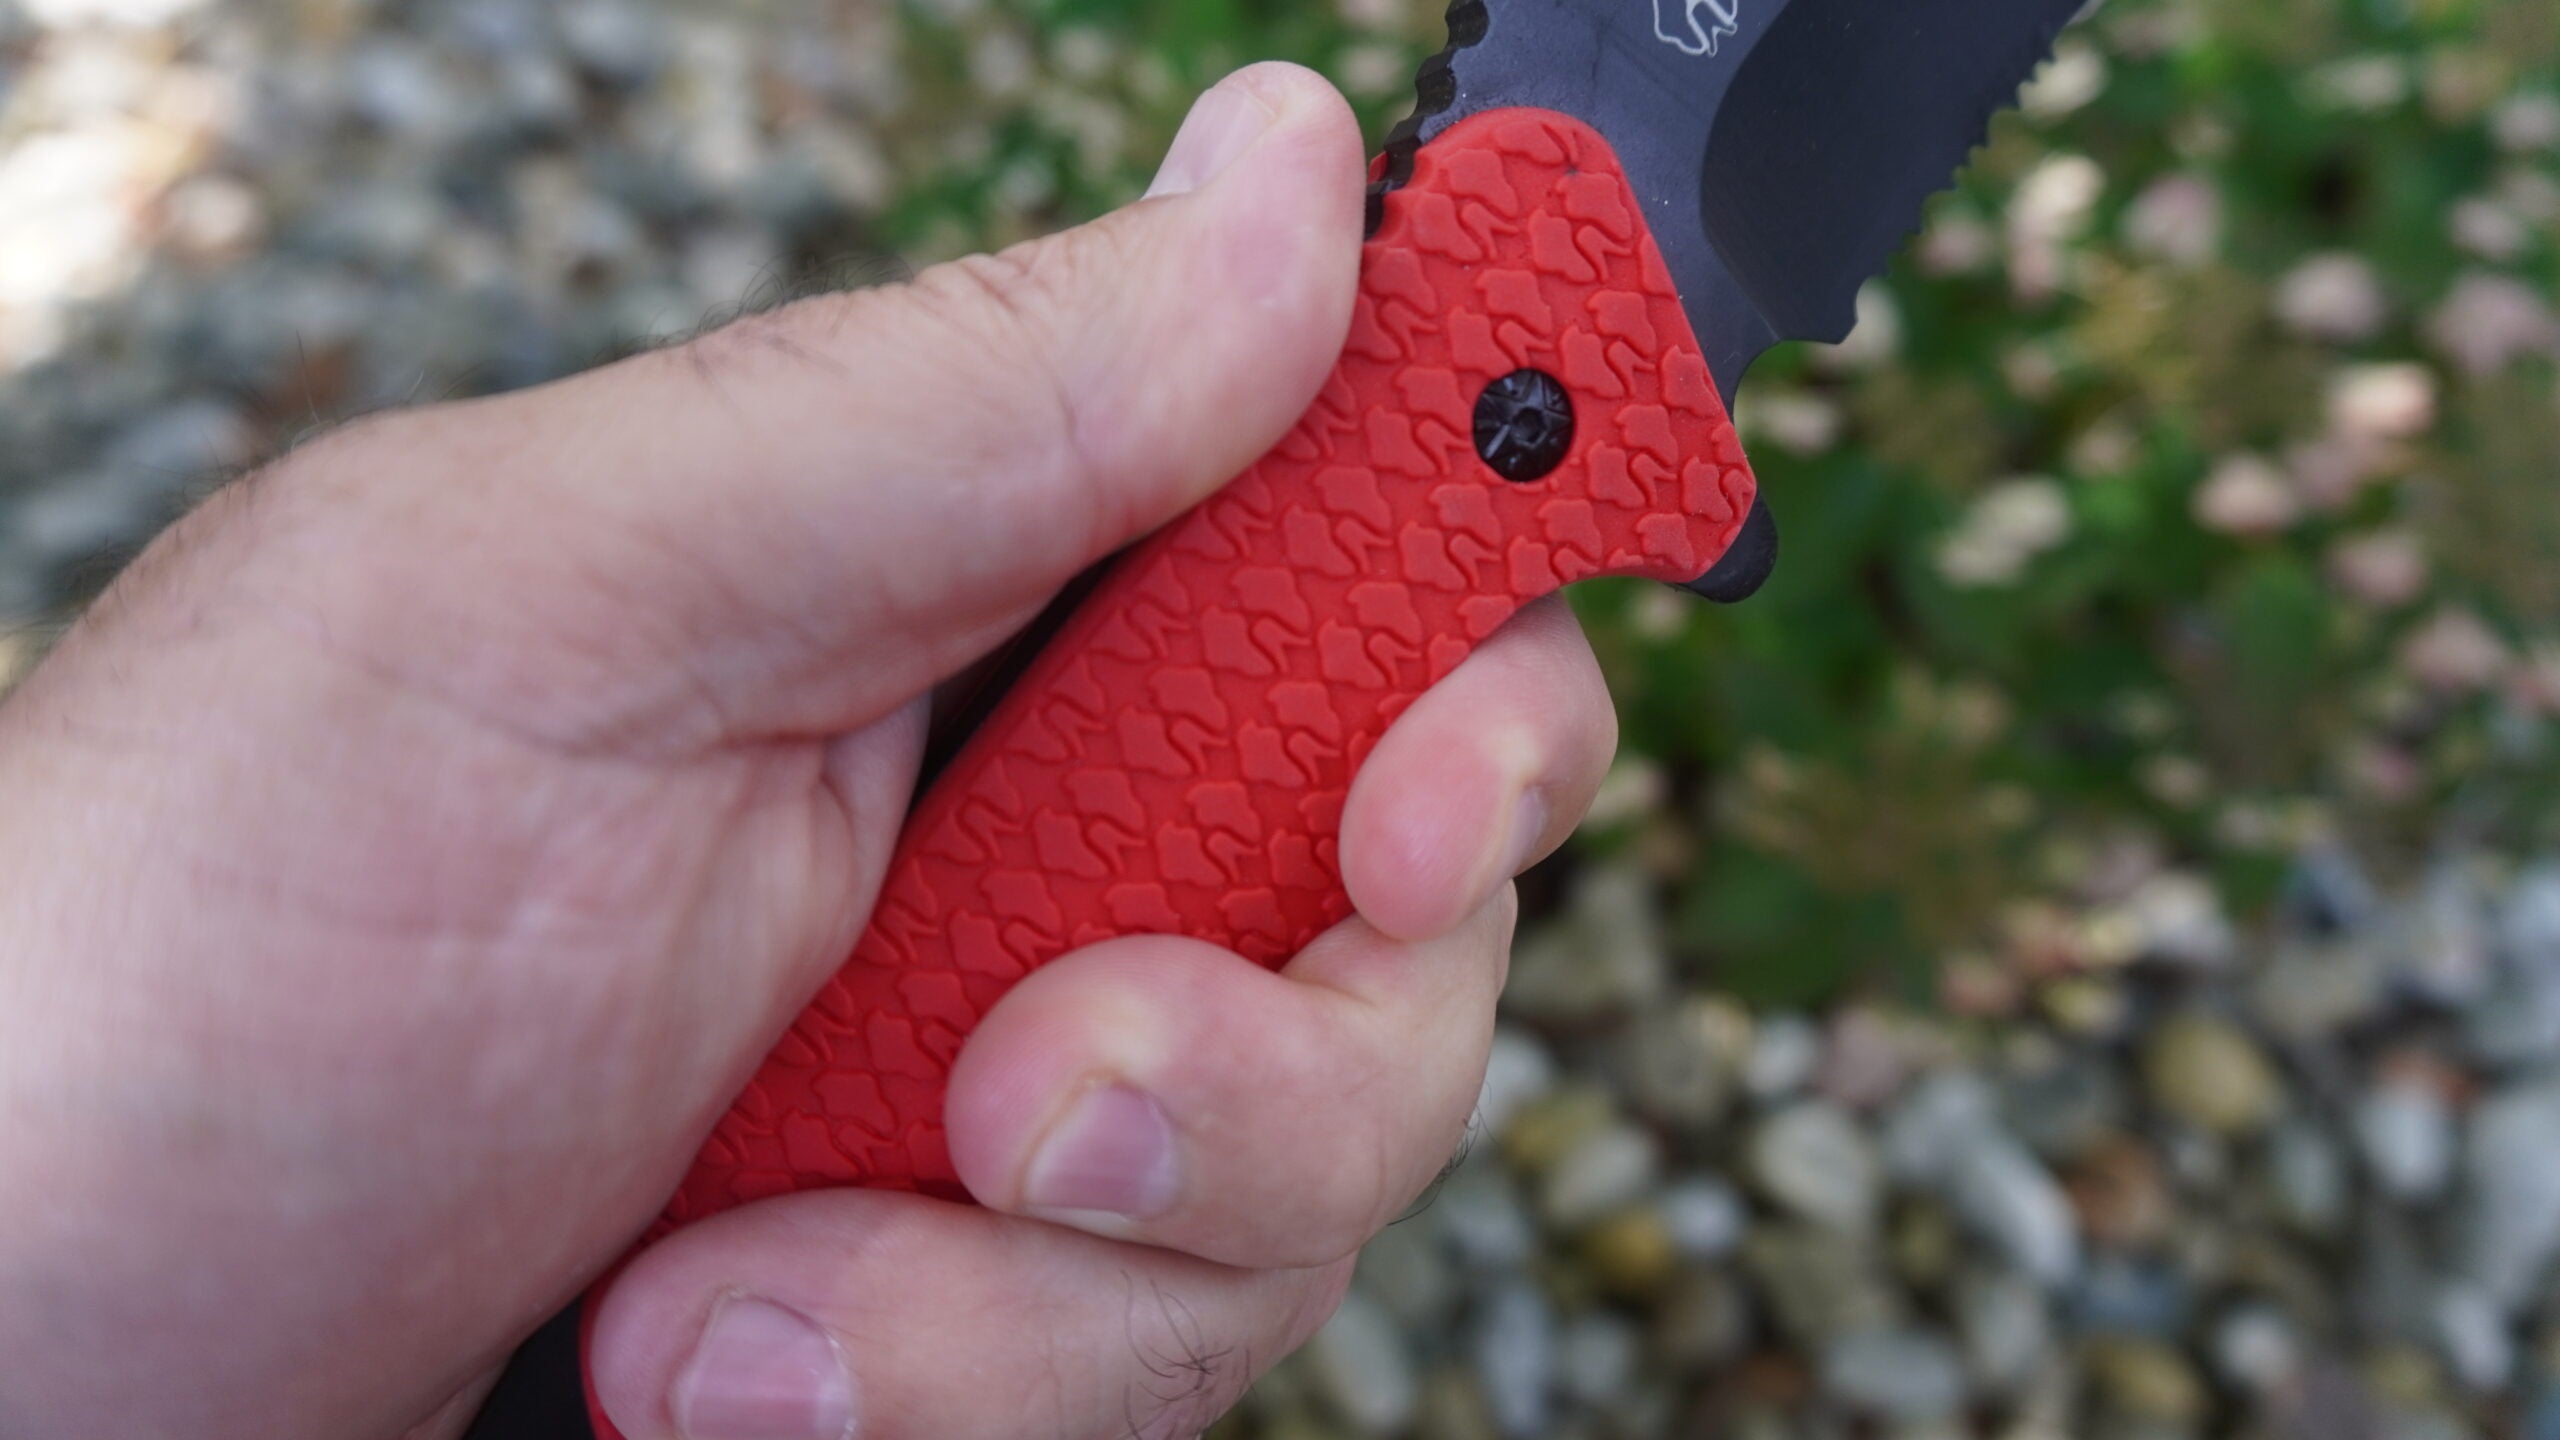 The grip of the Empire knife is comfortable and easy to hold.